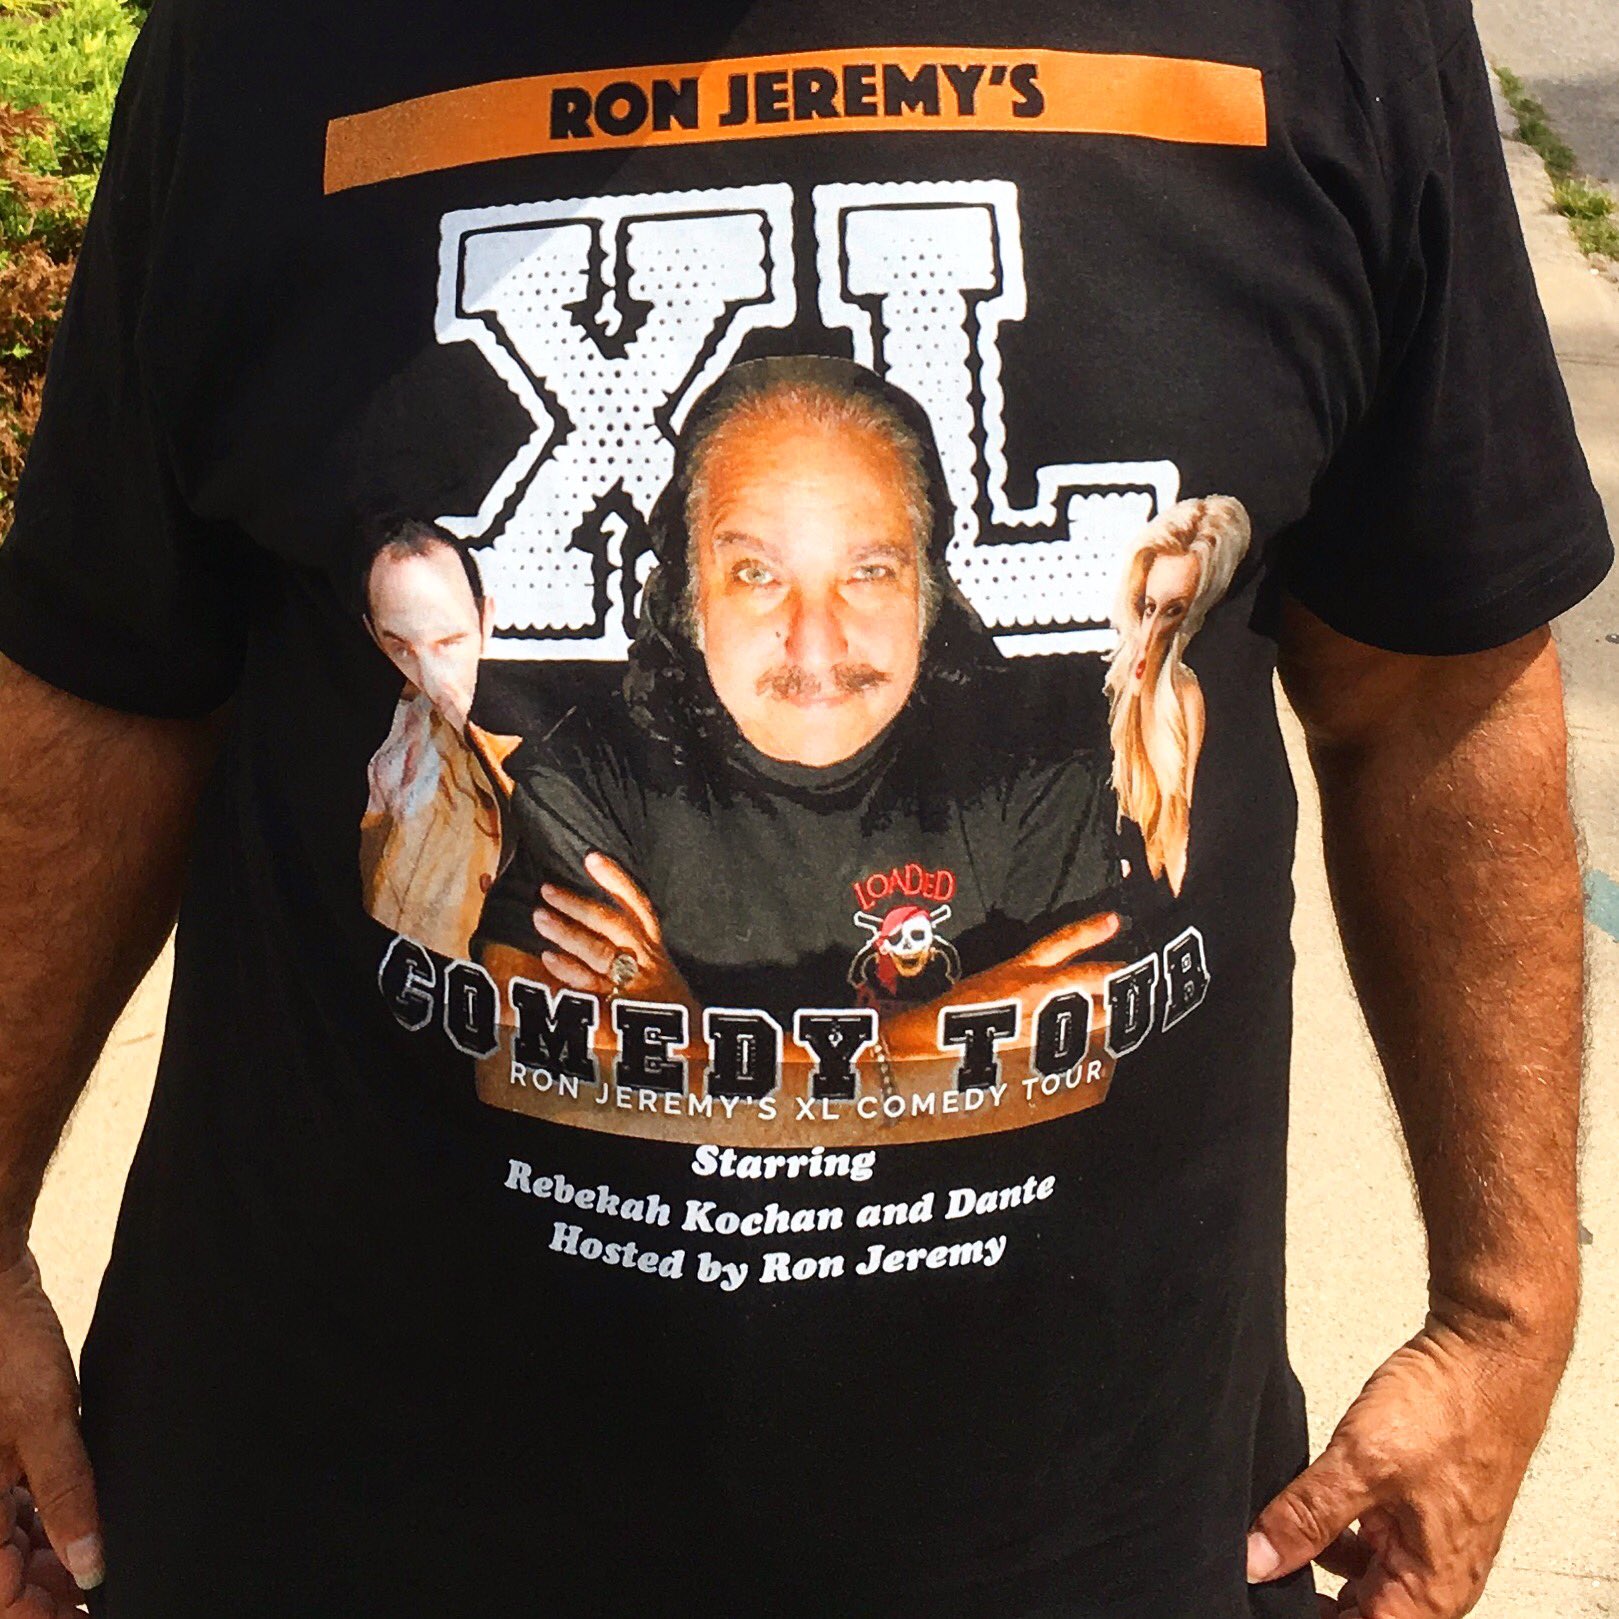 køkken rotation Venlighed Ron Jeremy on Twitter: "Check out all my shirts at @smyrx_shirts https://t.co/b8LkmUB4hf  you should check them out. I also sell my shirts after my shows. See me  tonight at the @stressfactorybpt in #